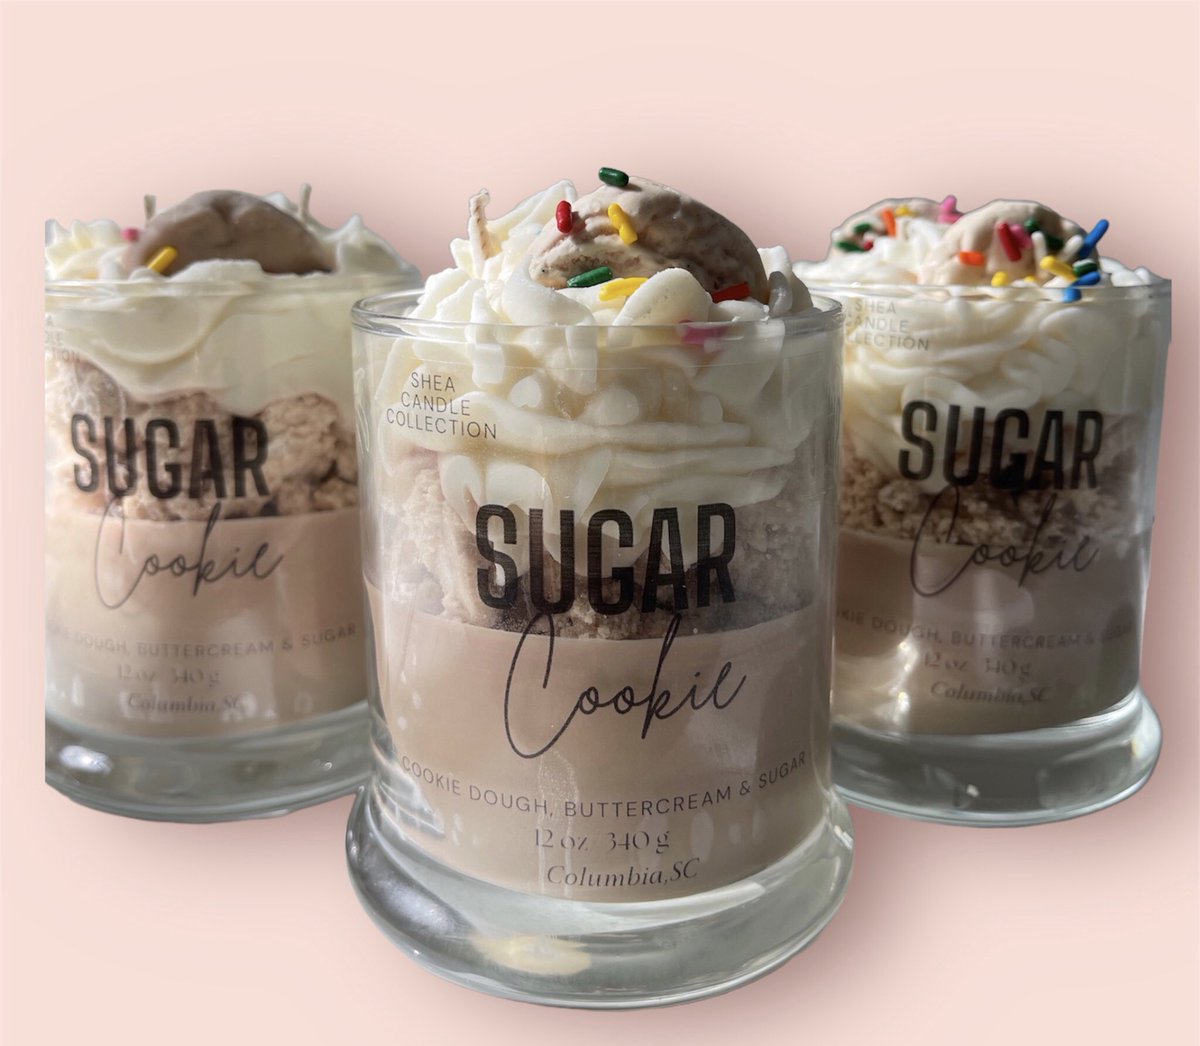 Get your Sugar Cookie Dessert Candle today. Shop 🛍️SheaCandleCollection.com🛍️ Also sign up today and get 10% off your first order!
#candle #blackOwnedBusiness #candlelover #shoplocal #SmallBusinesses